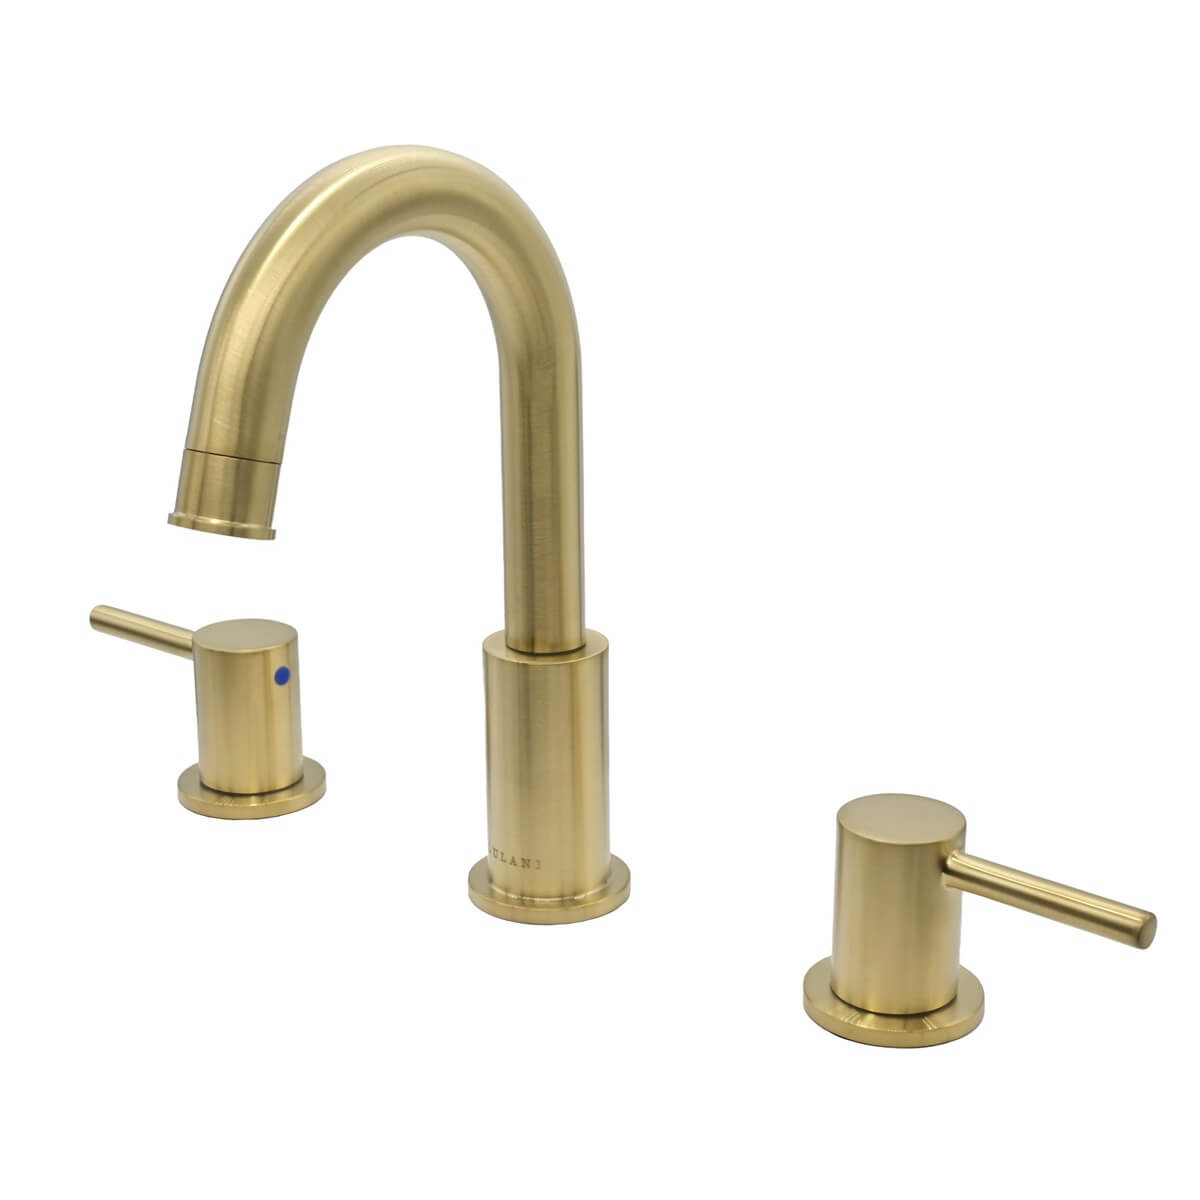 St. Lucia 2 Handle 3 Hole Widespread Brass Bathroom Faucet with drain assembly